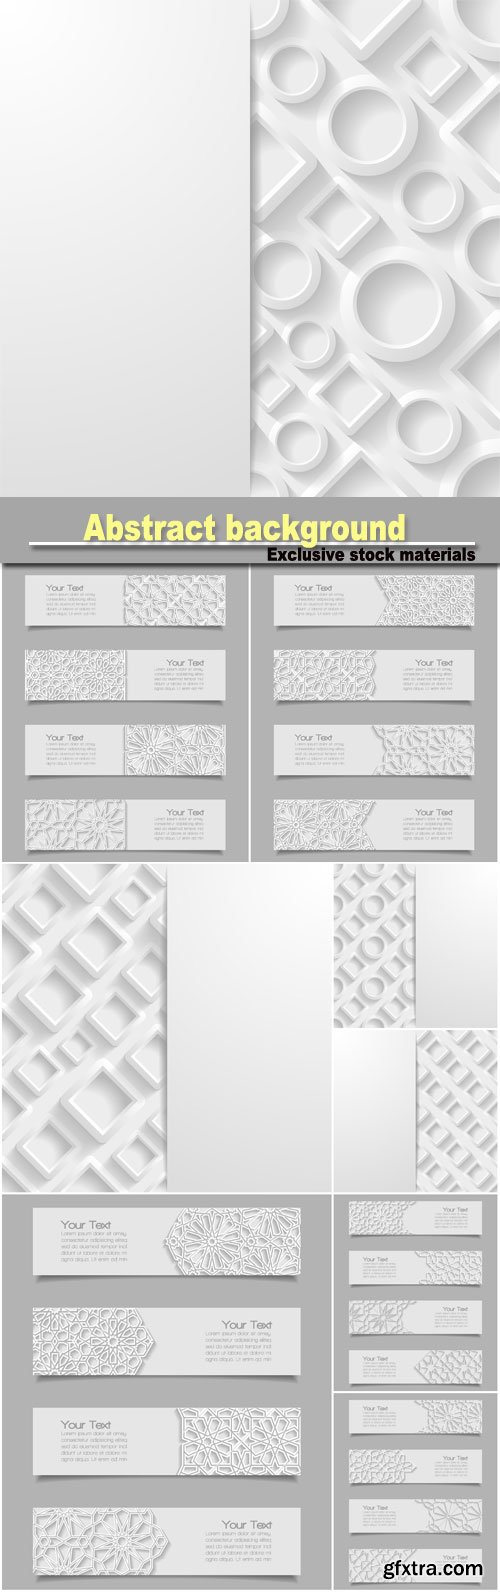 Abstract geometric background, set of banners with traditional ornament